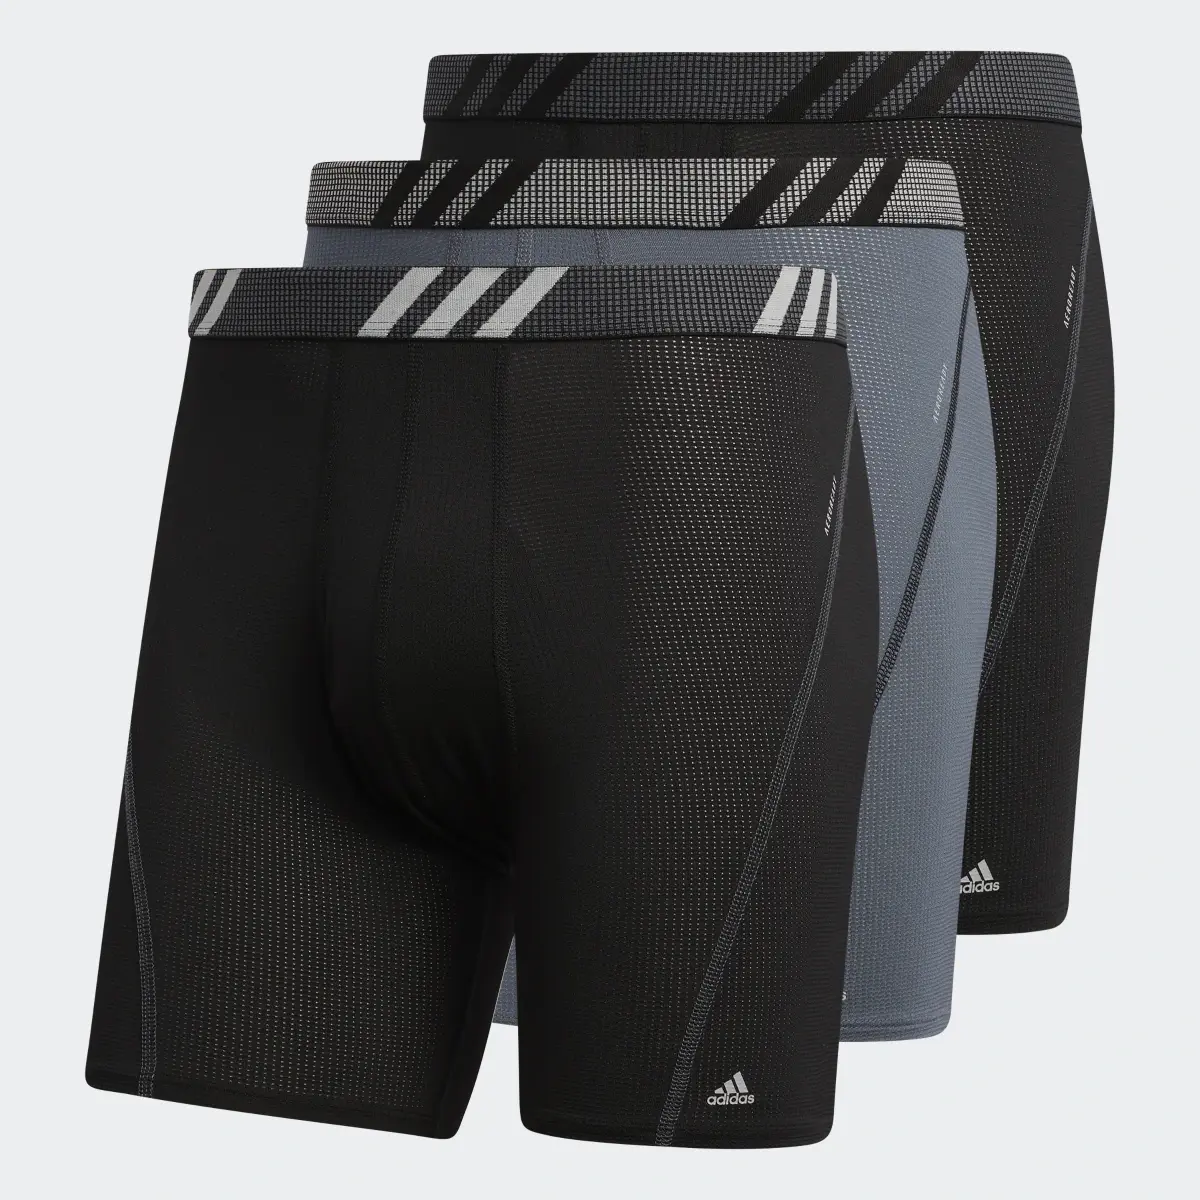 Adidas Performance Mesh Boxer Briefs 3 Pairs (Big and Tall). 2